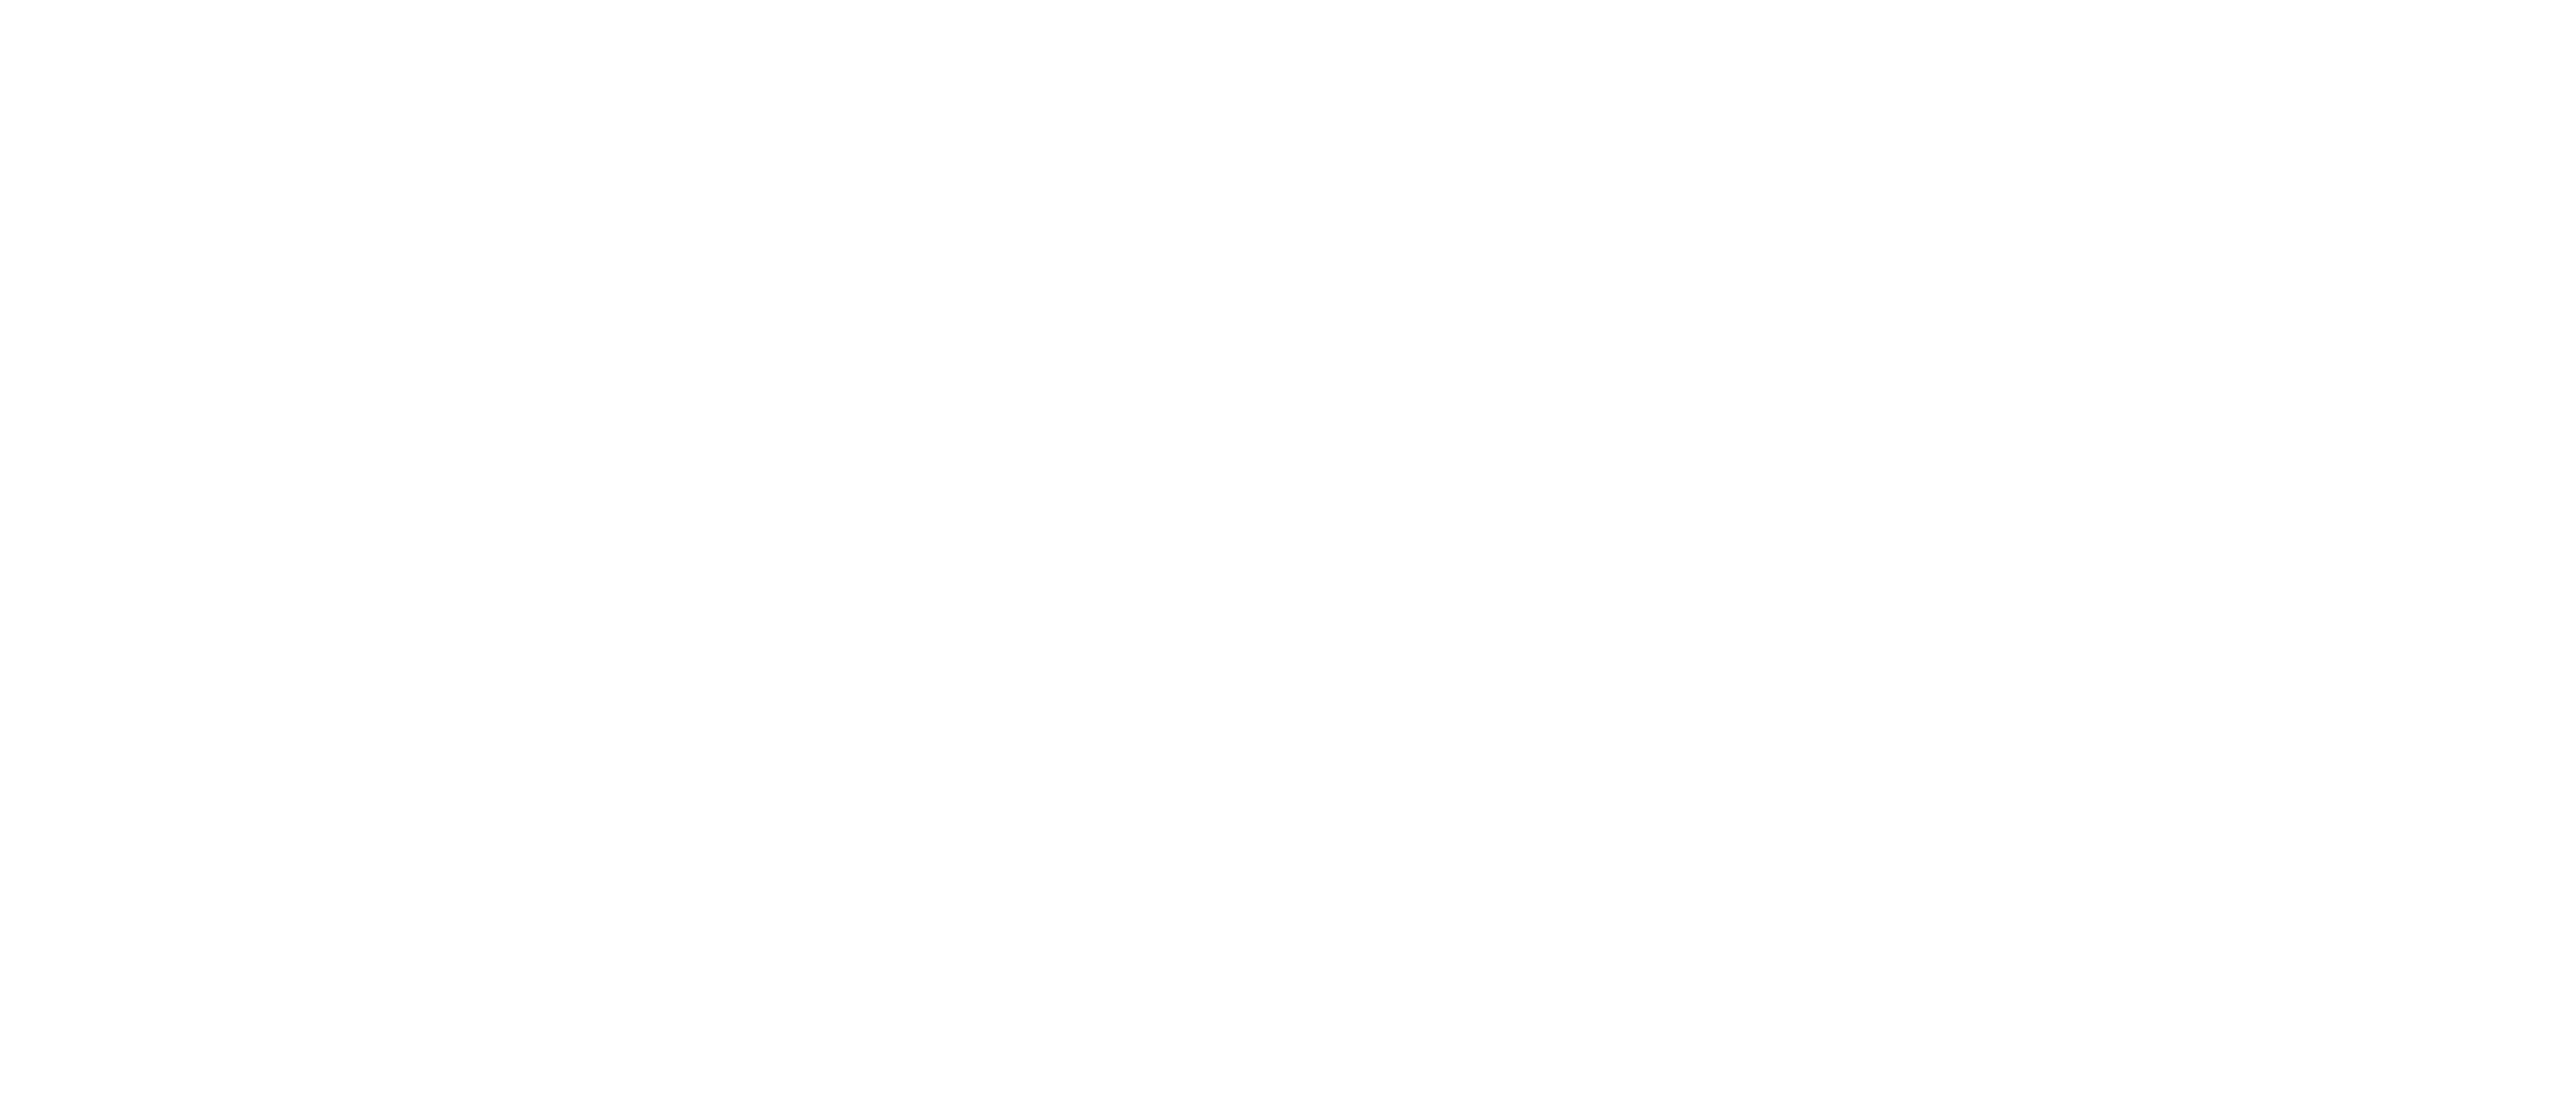 Occupational First Aid Course at Singapore First Aid Training Centre